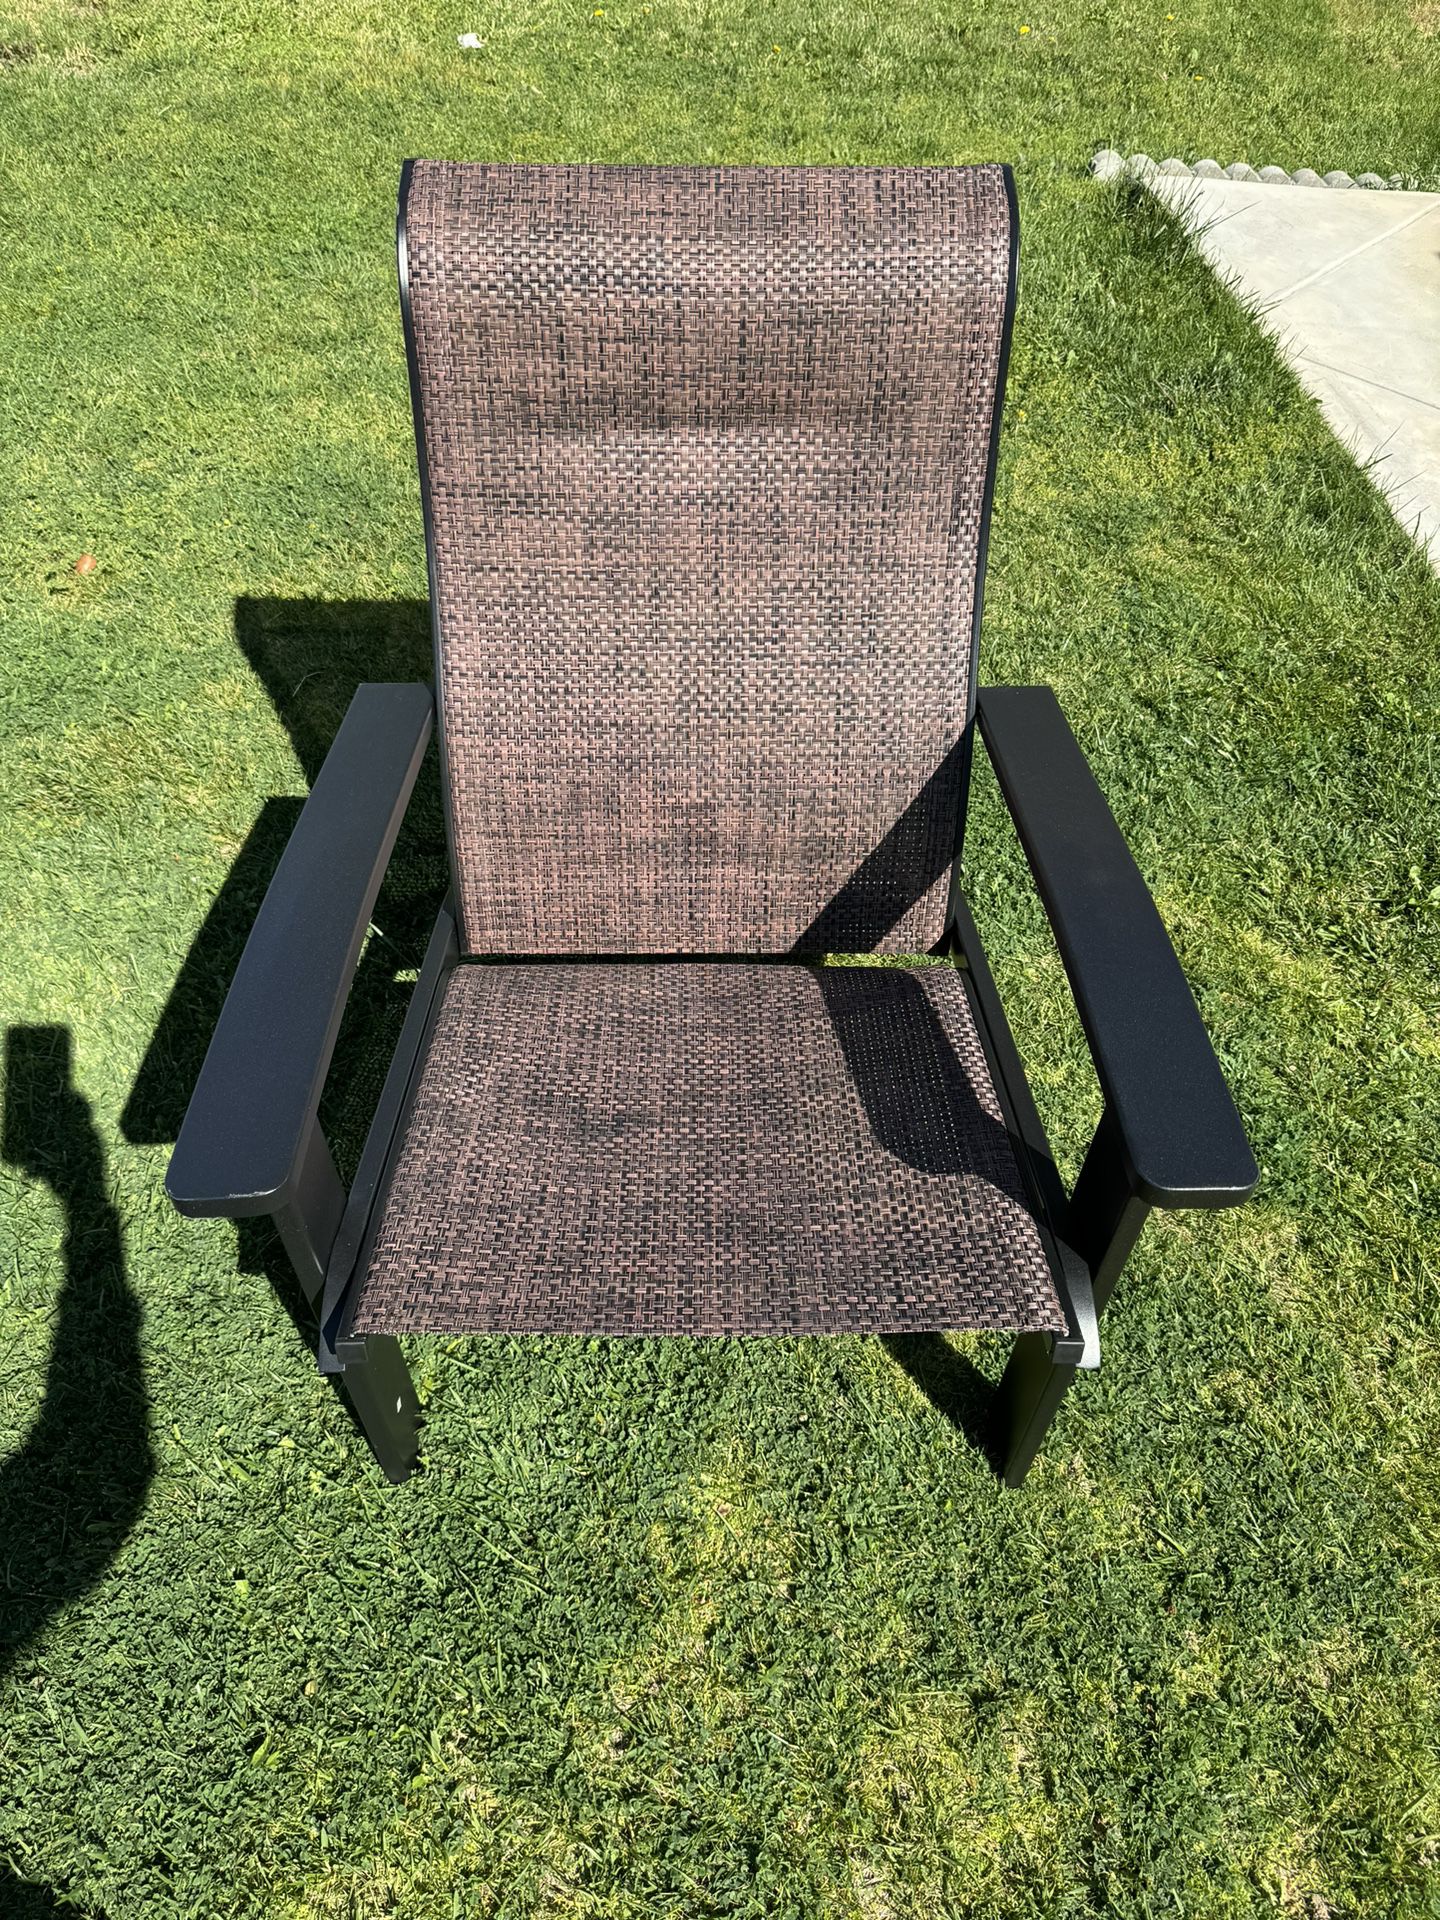 Adirondack Chair, Weather-Resistant Outdoor Furniture Lawn Chair New!